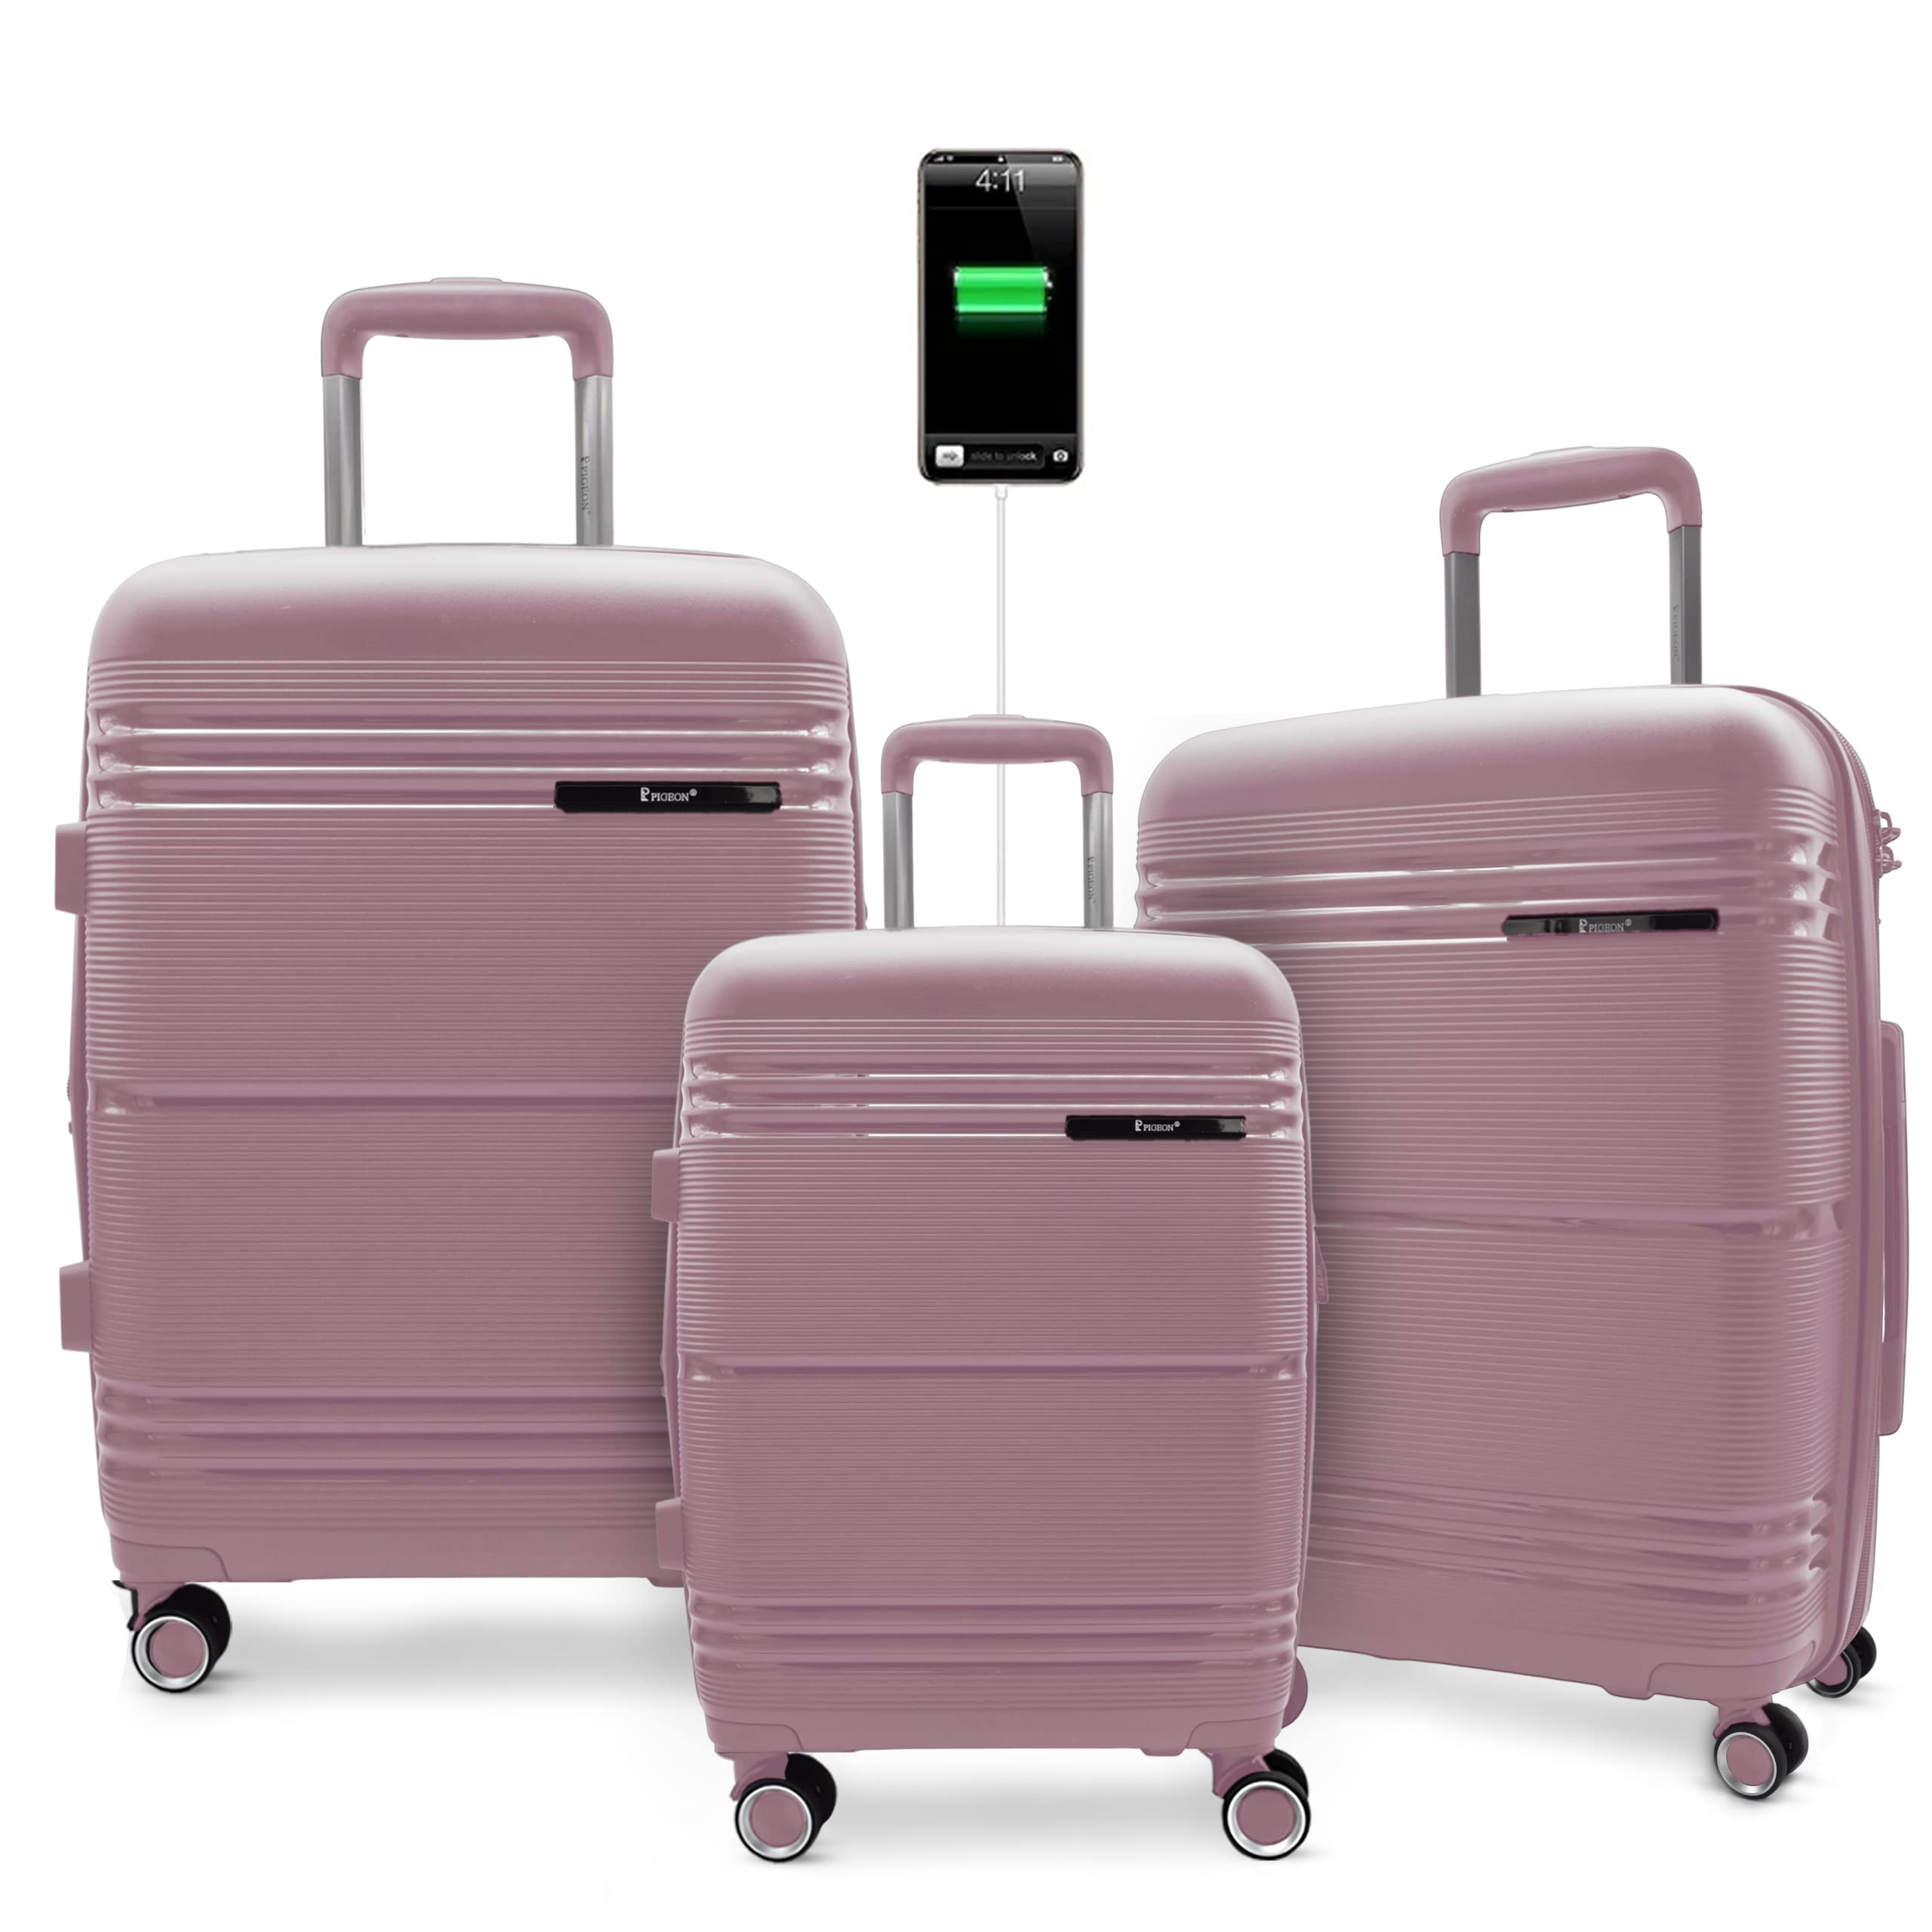 PIGEON New Luggage Set With Double Secure Zipper - Lightweight 5 Colors 3-Piece PP Luggage Sets, water resistant with 3 digit number Lock